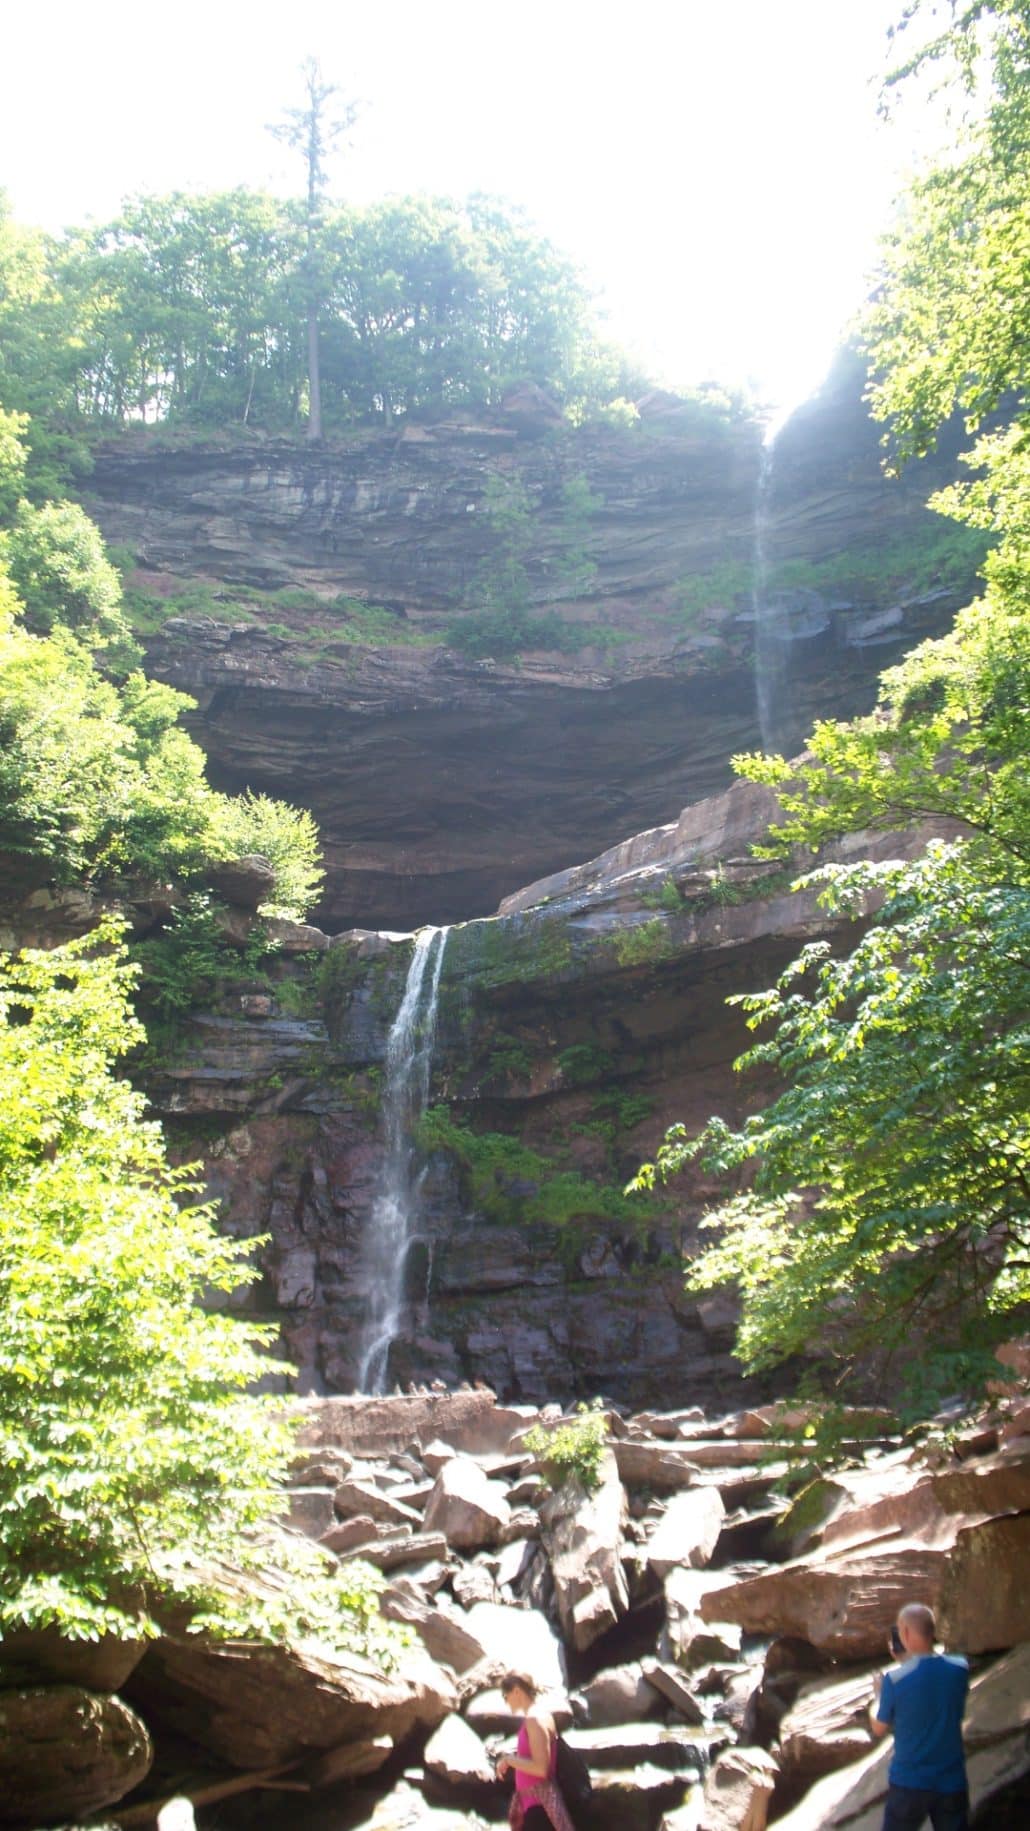 Another view of Kaaterskill Falls